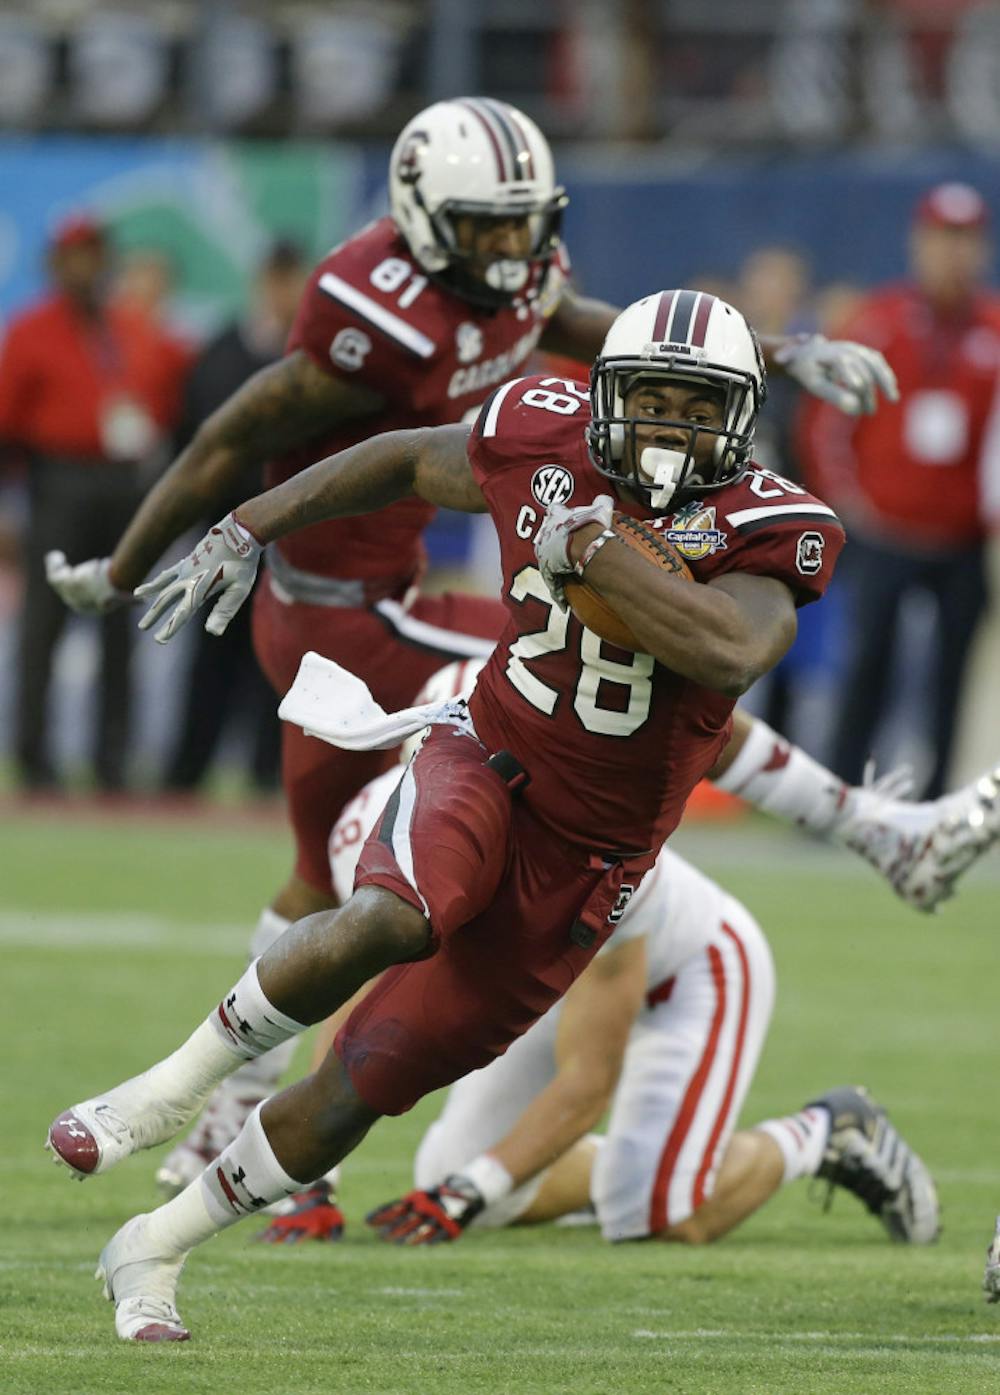 <p>In this Jan. 1, 2014, file photo, South Carolina running back Mike Davis (28) gains yardage against Wisconsin during the second half of the Capital One Bowl NCAA college football game in Orlando, Fla. Steve Spurrier says 1,000-yard rusher Mike Davis hadn't practiced last week and might not be ready when the ninth-ranked Gamecocks open the season against No. 21 Texas A&amp;M tonight.</p>